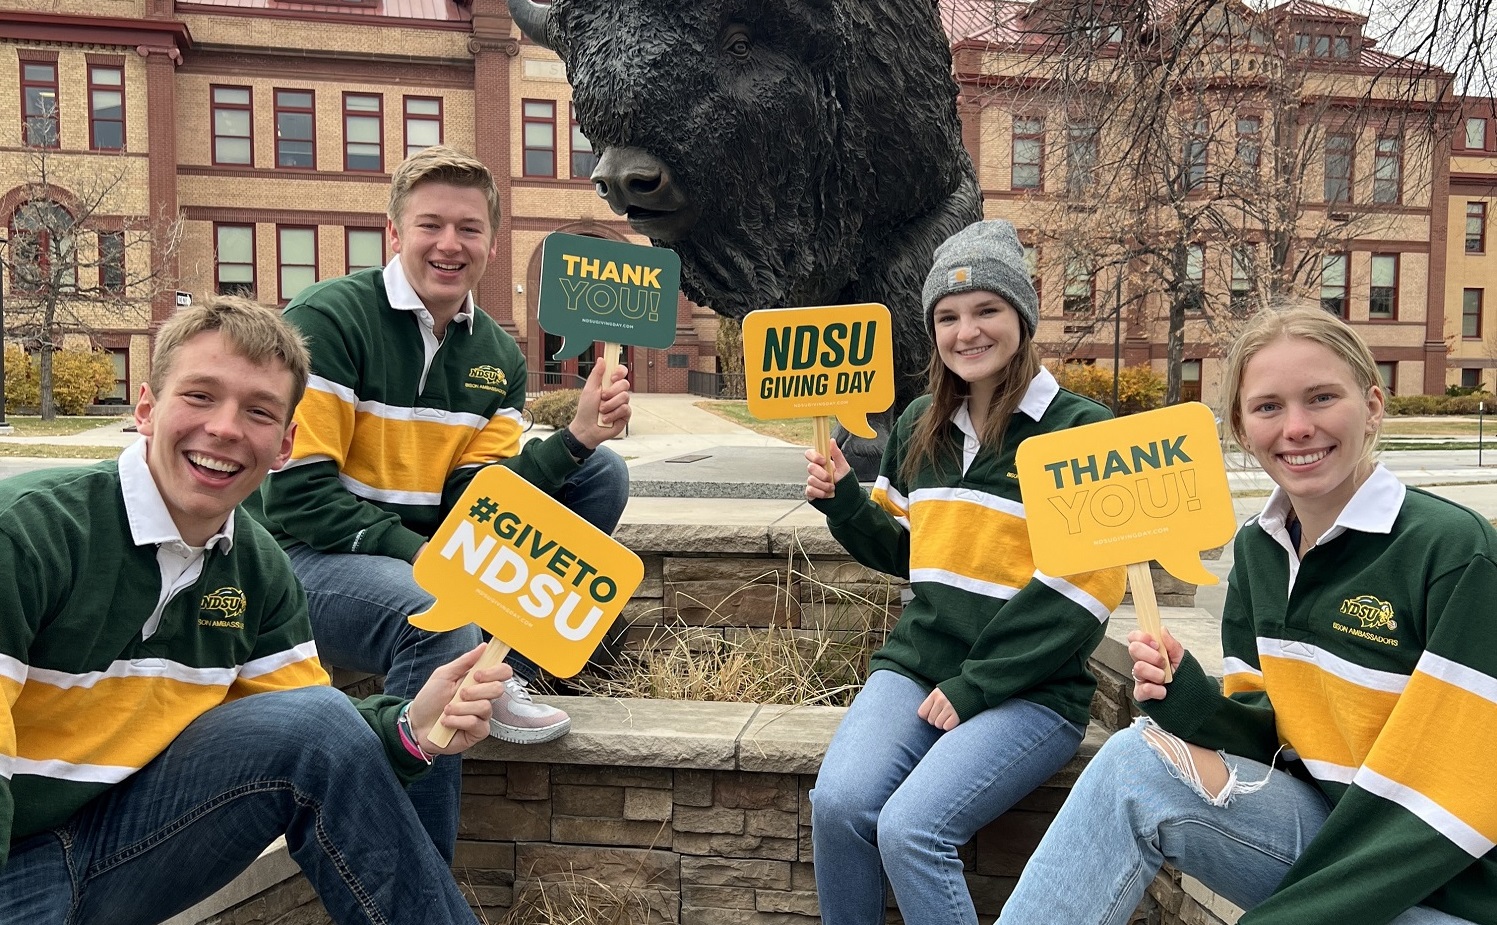 Students say thank you to donors for their gifts to NDSU on Giving Day